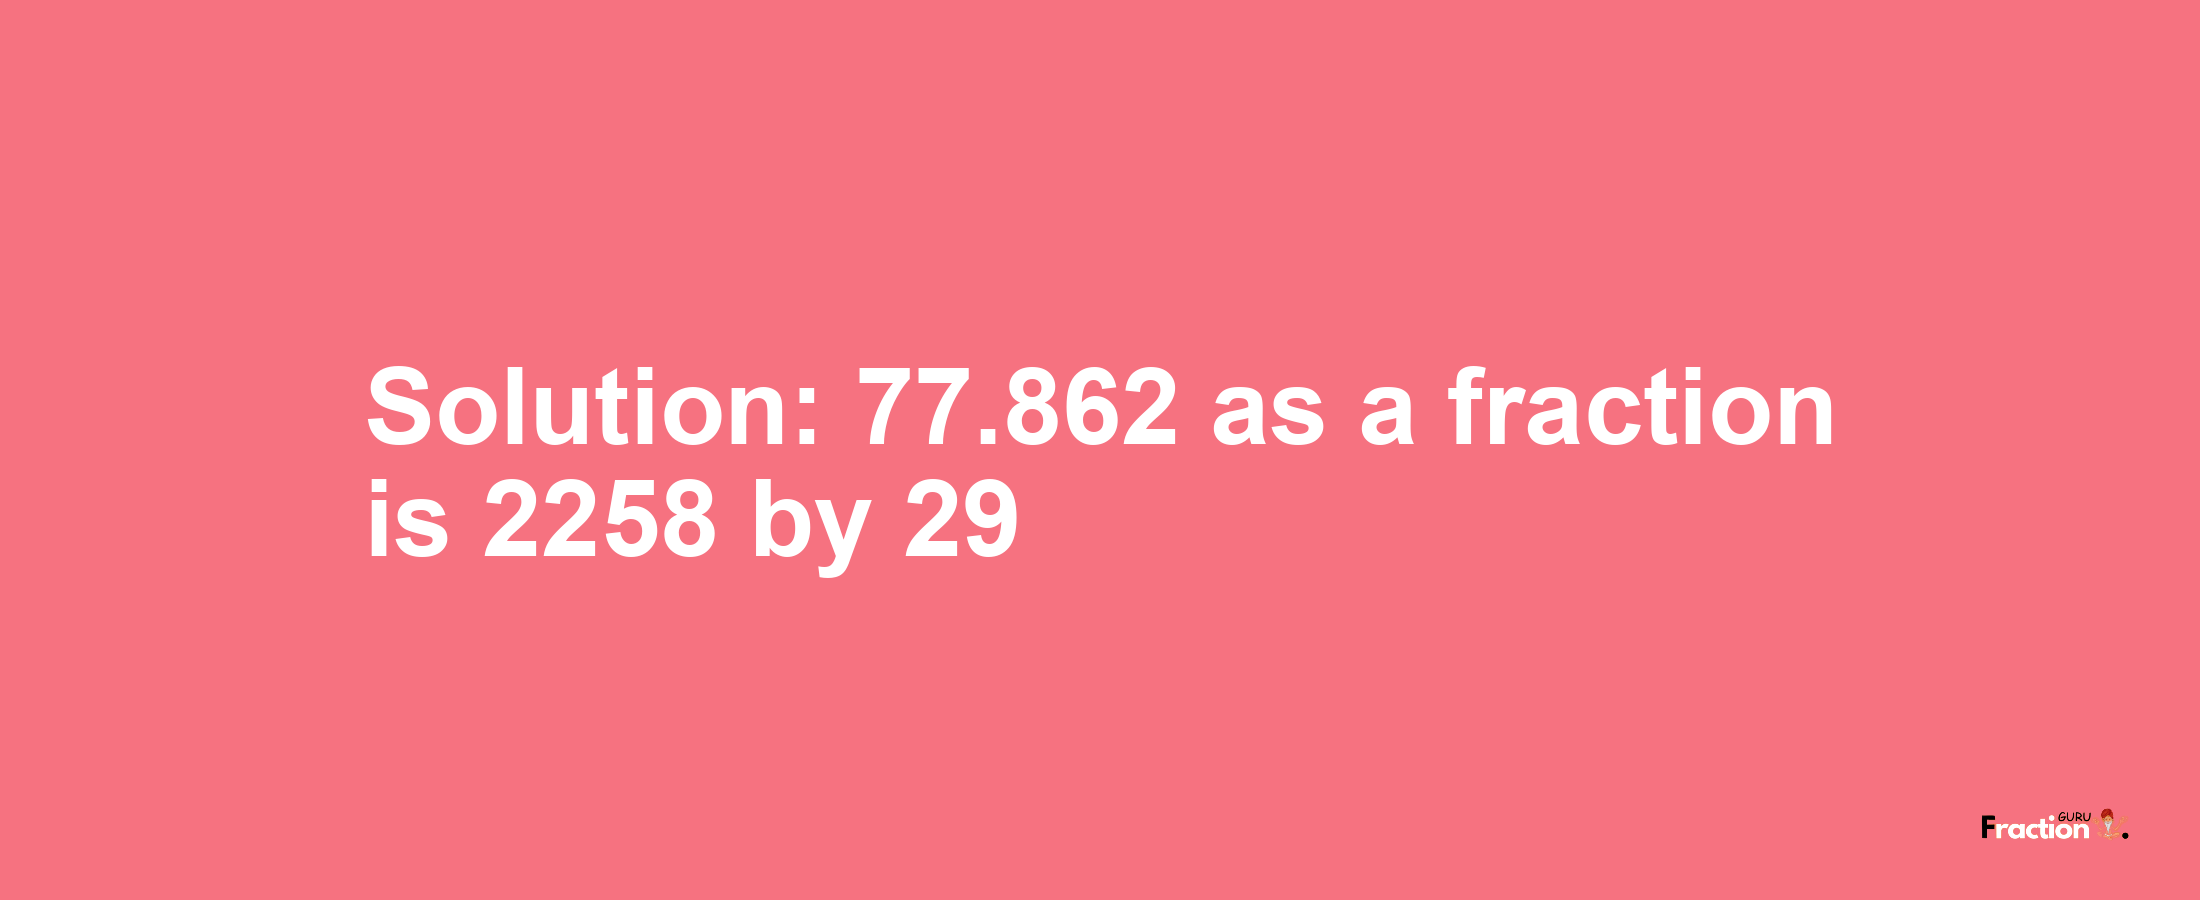 Solution:77.862 as a fraction is 2258/29